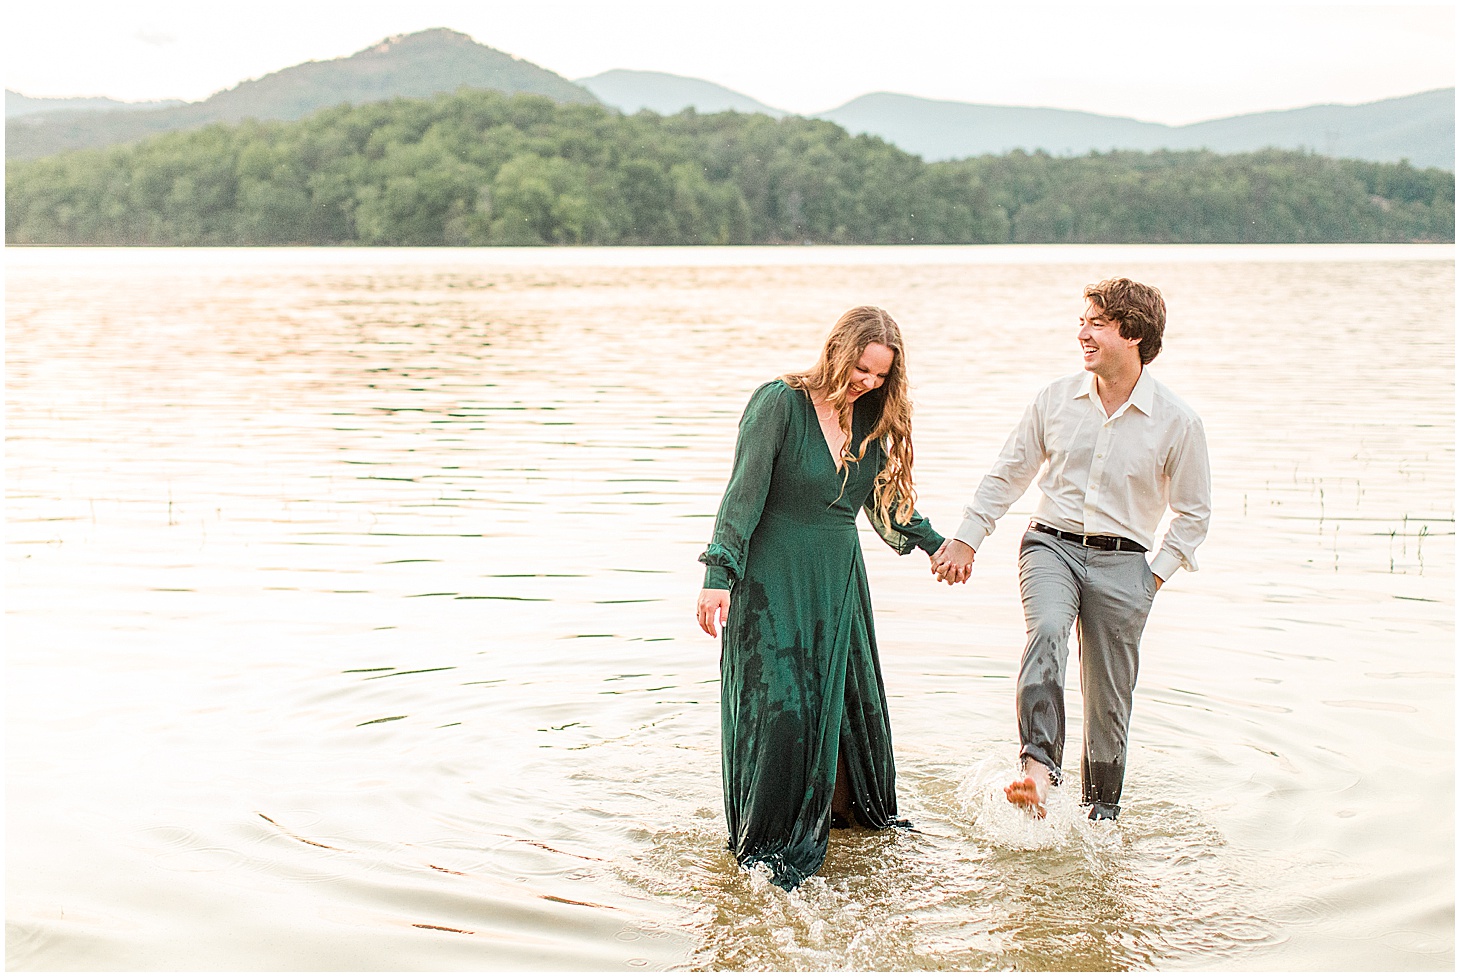 carvinscoveengagementsession_roanokeengagementsession_carvinscove_virginiawedding_virginiaweddingphotographer_vaweddingphotographer_photo_0061.jpg